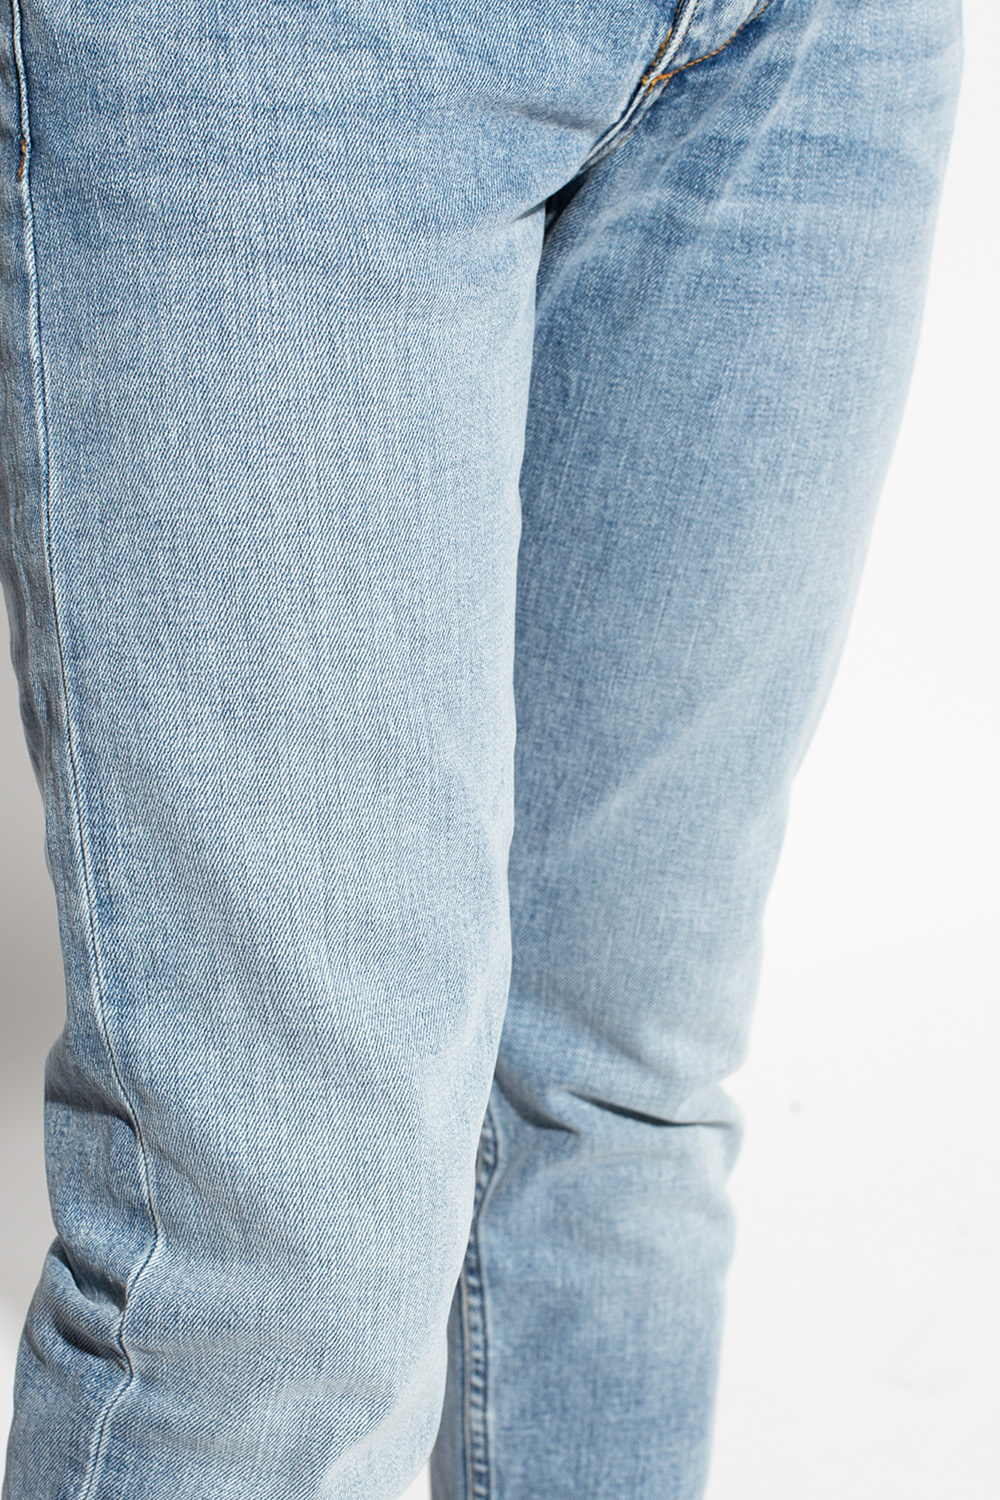 MOTHER Schmale High-Rise-Jeans Blau  Jeans with worn effect